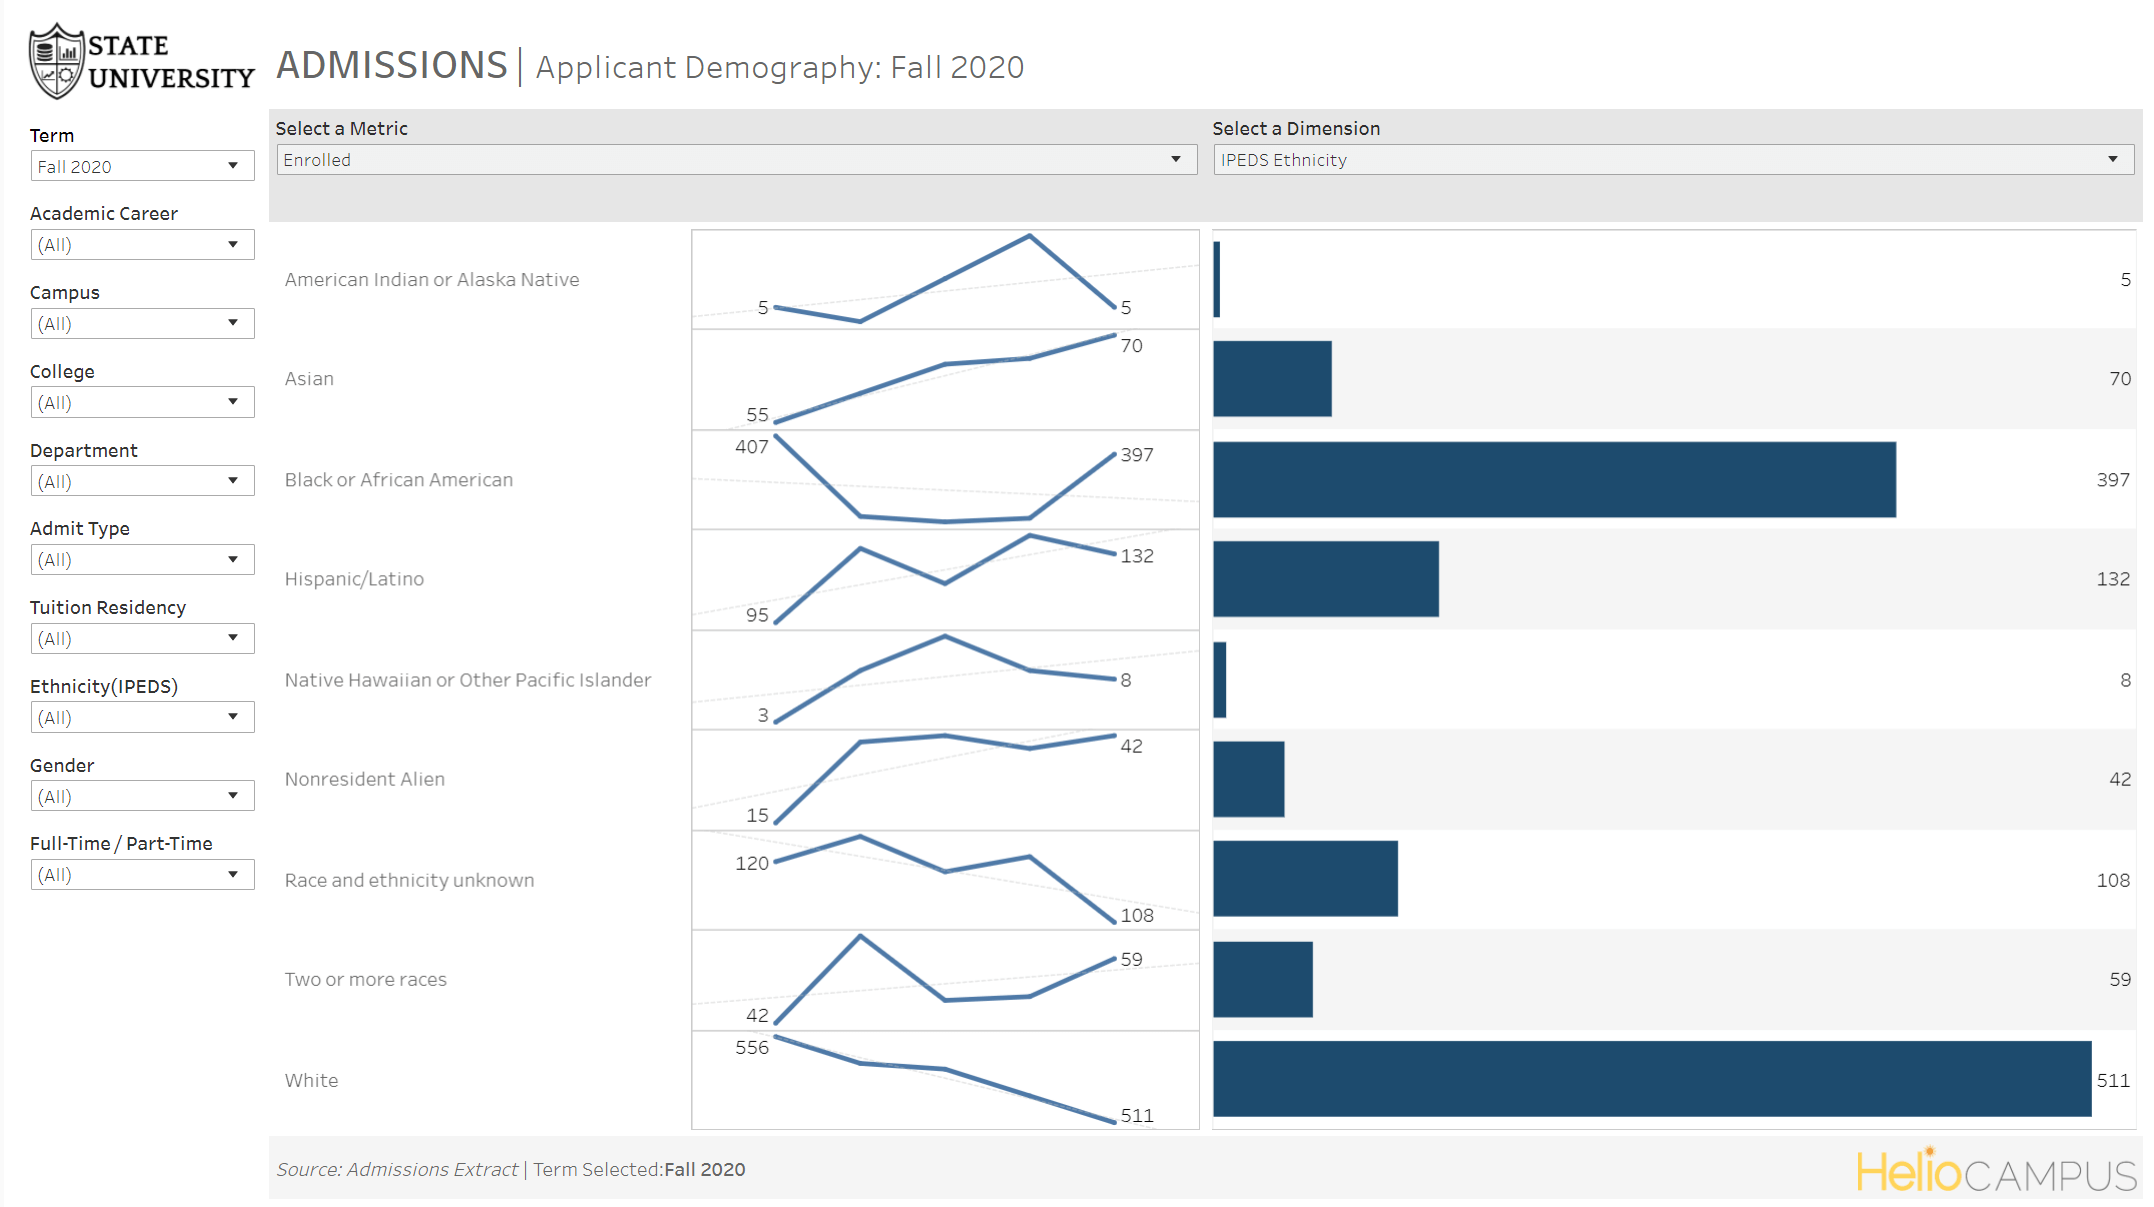 Product screenshot of graphs comparing applicant demography